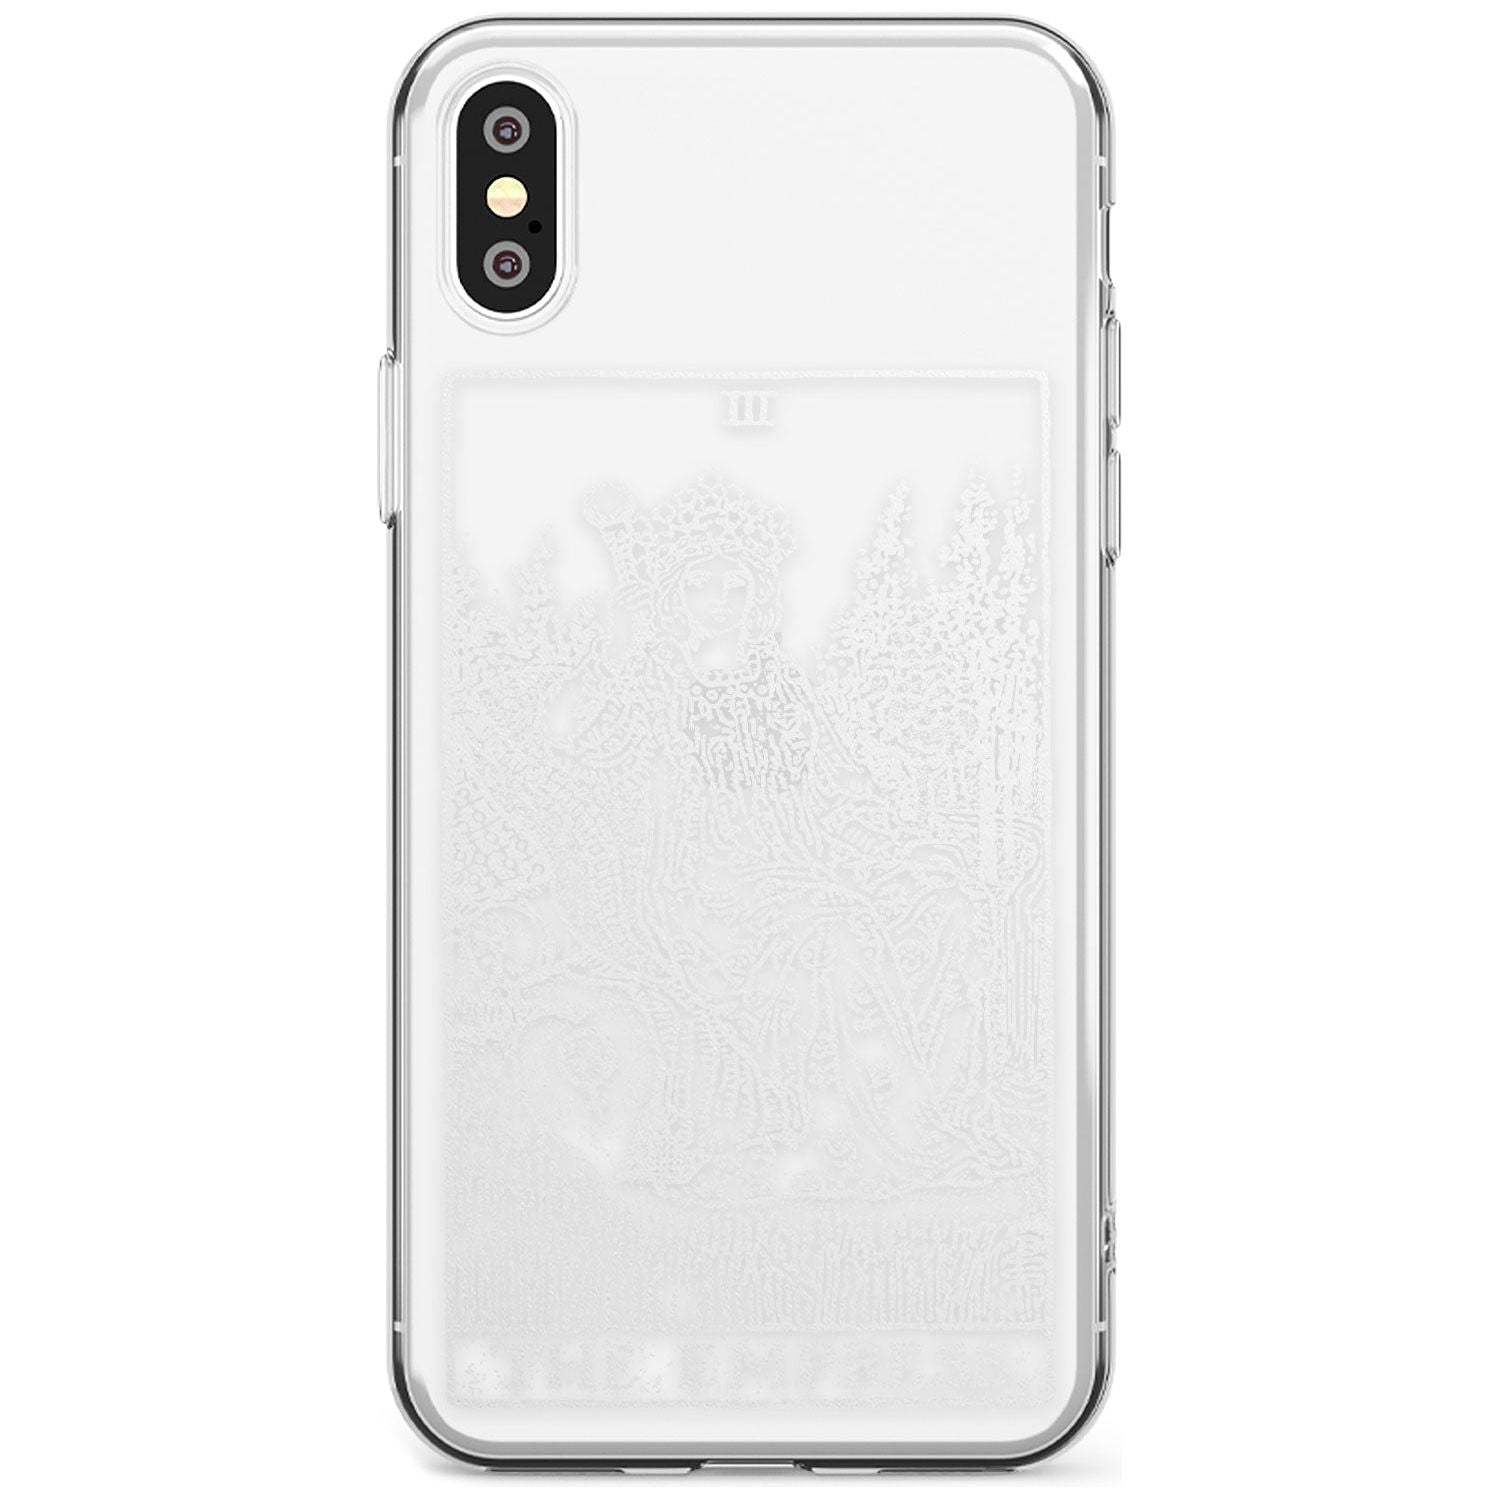 The Empress Tarot Card - White Transparent Black Impact Phone Case for iPhone X XS Max XR